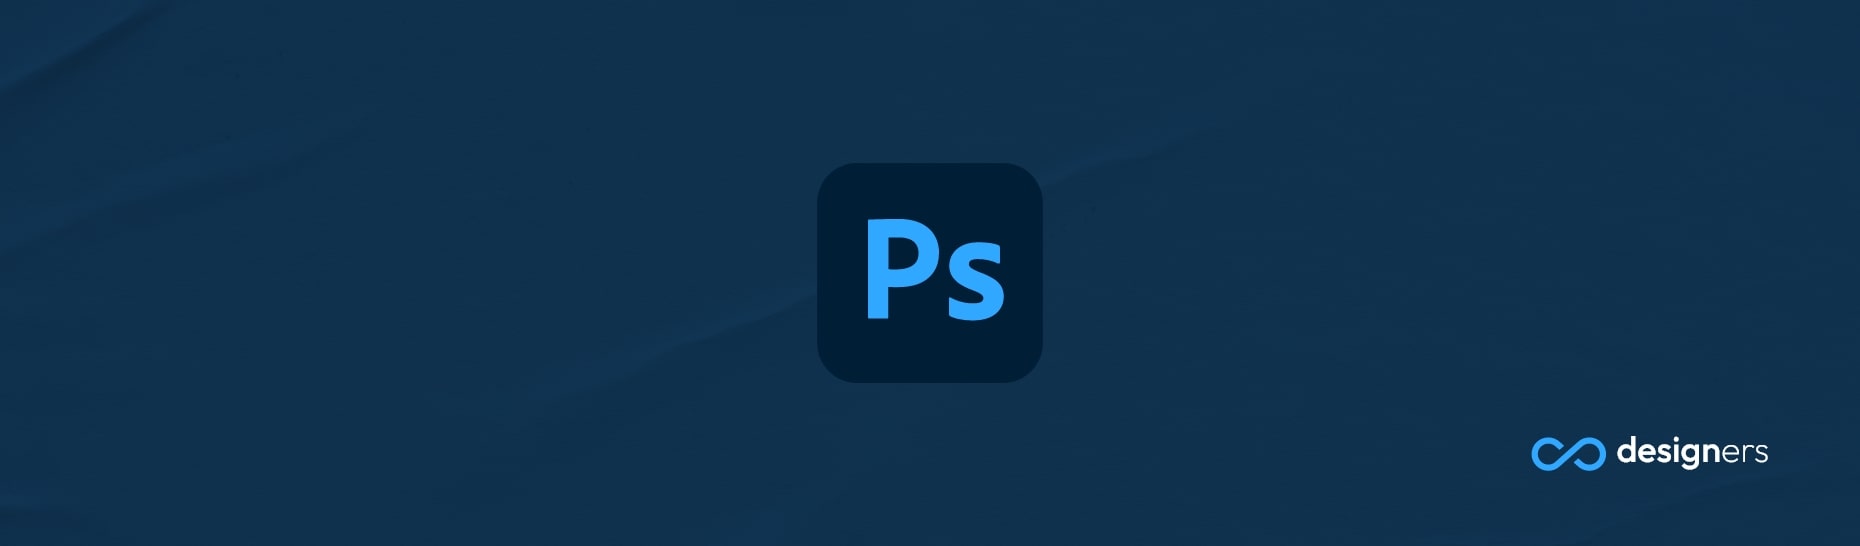 How Do I Put a Border Around an Object in Photoshop?